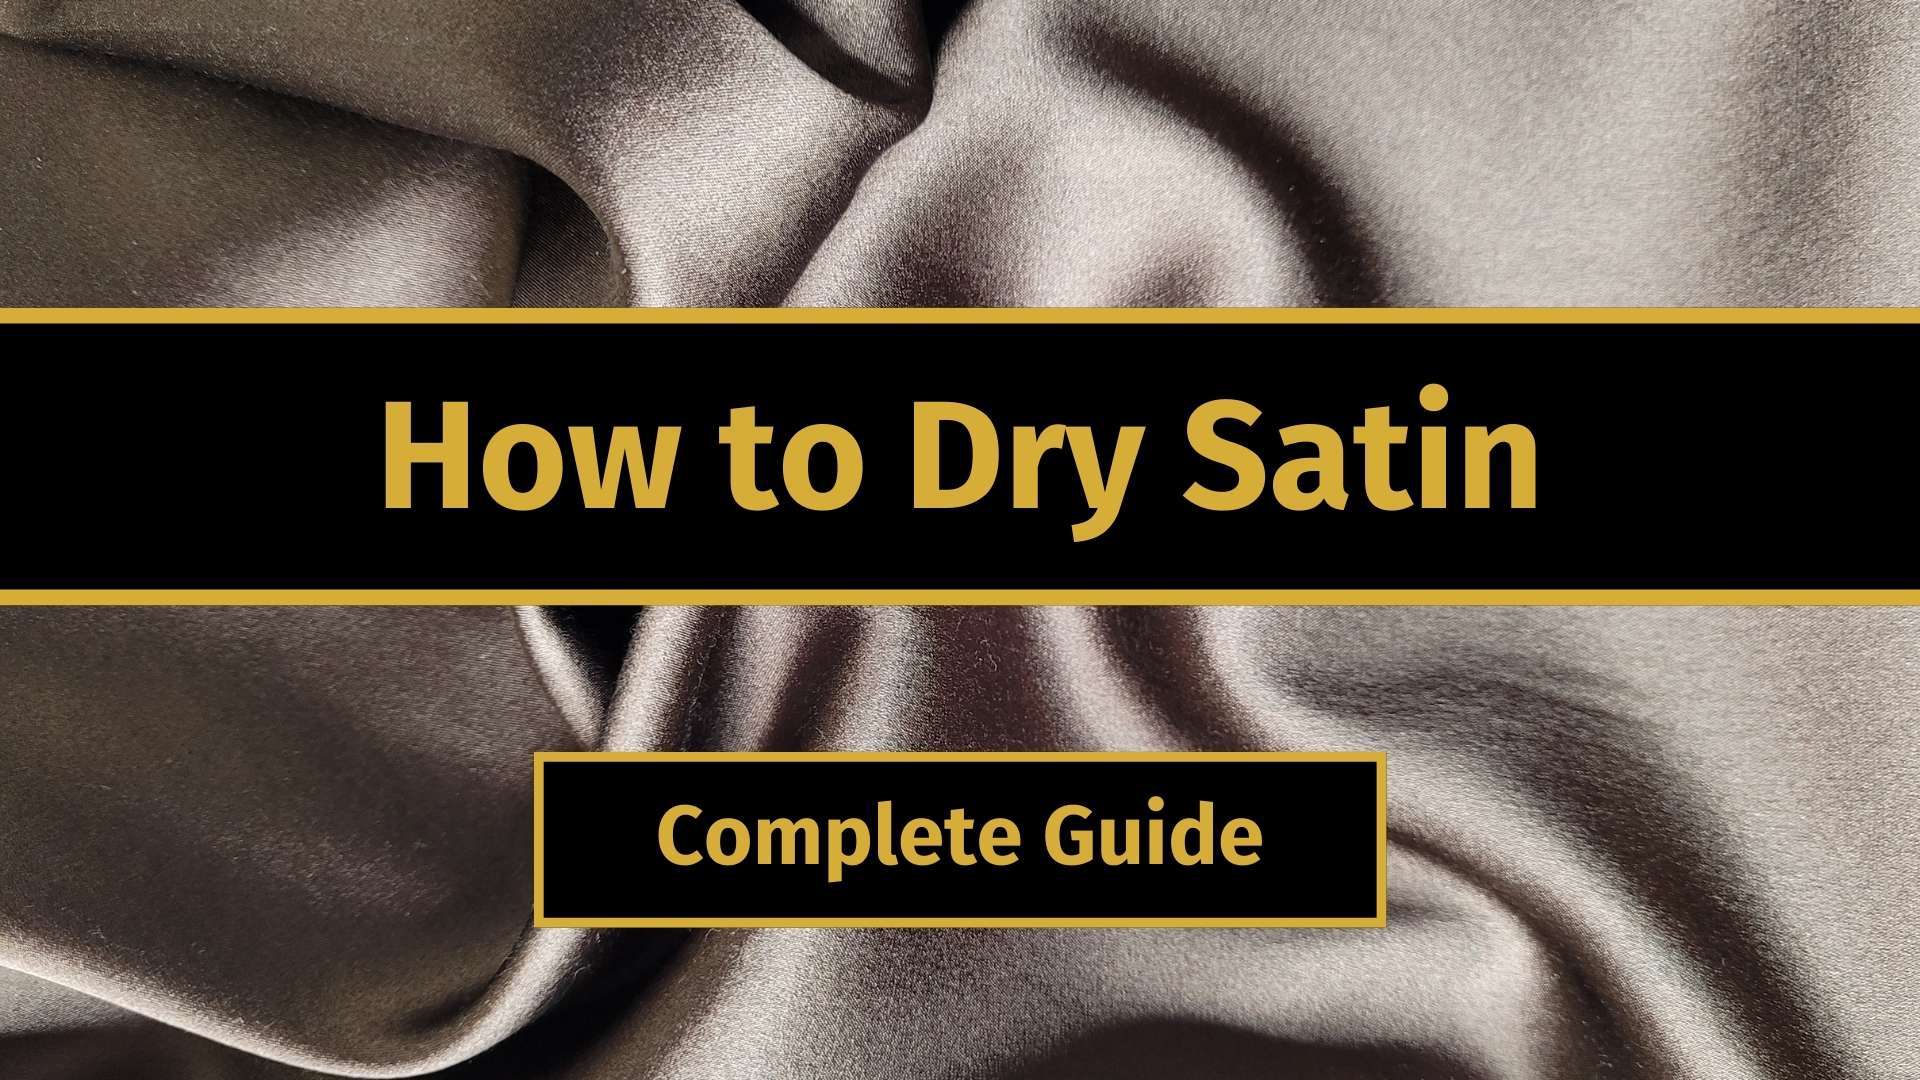 how to dry satin banner image